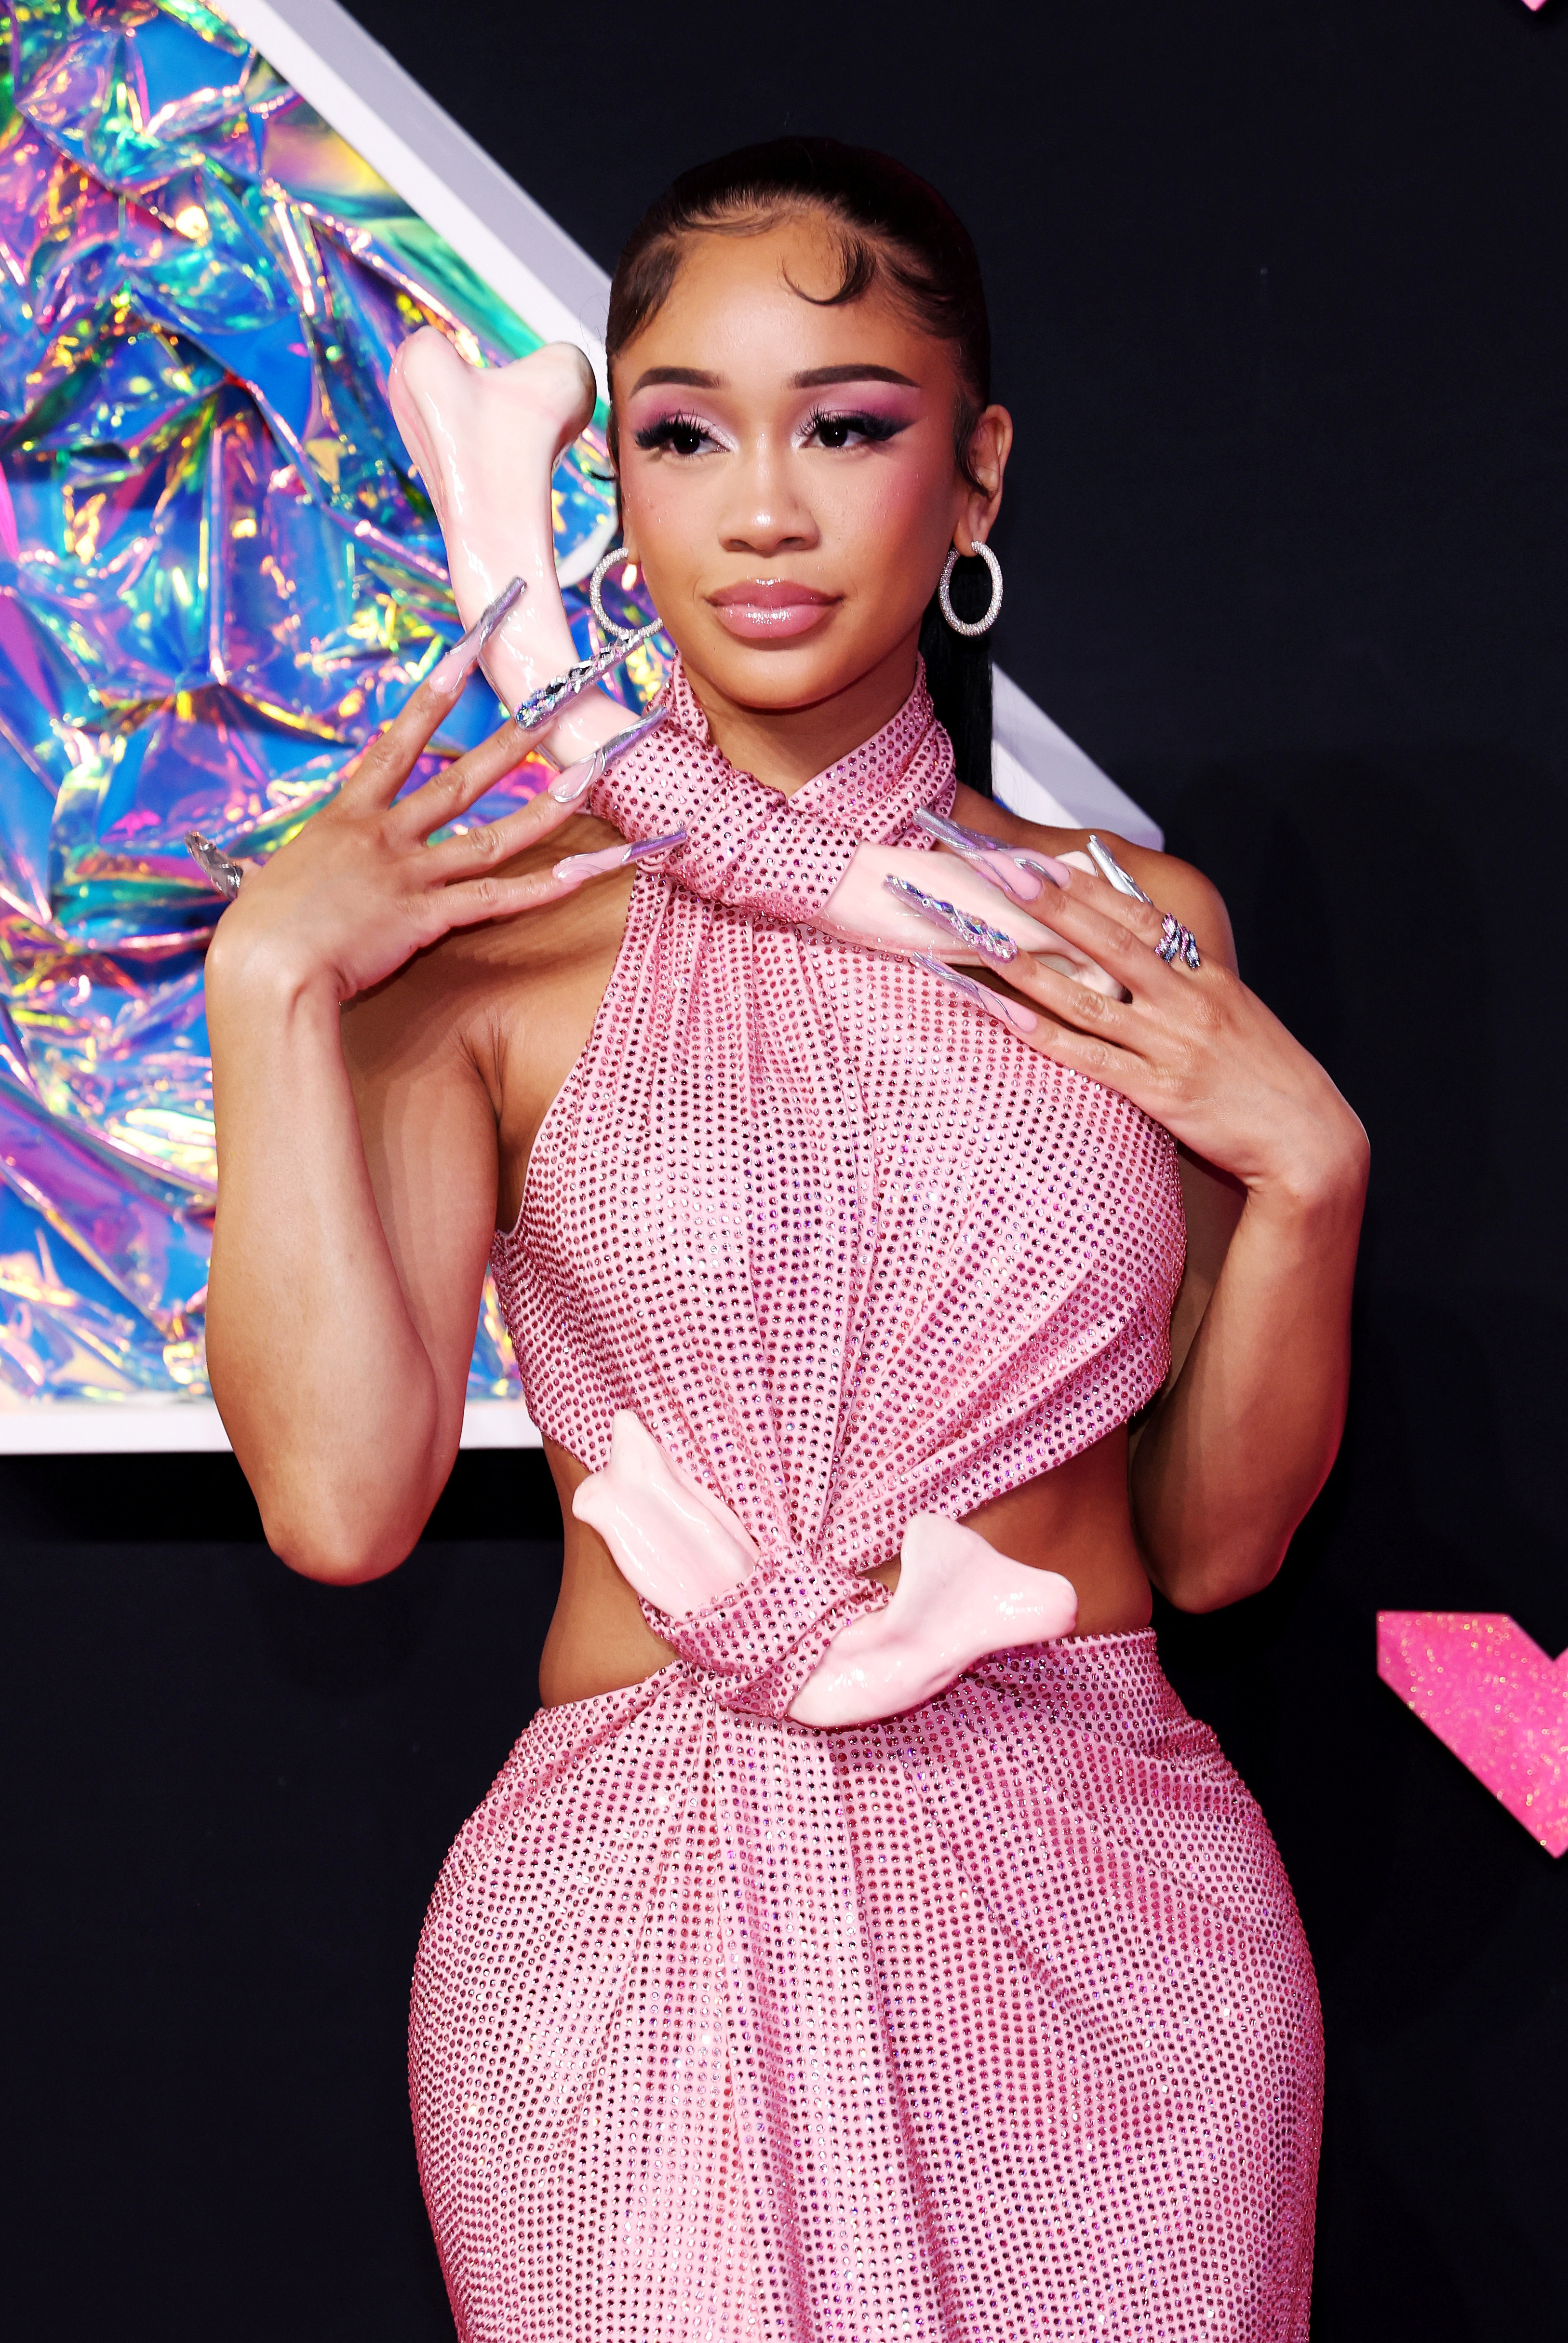 Saweetie is wearing a pink sparkly dress with pink bone-like accessories.